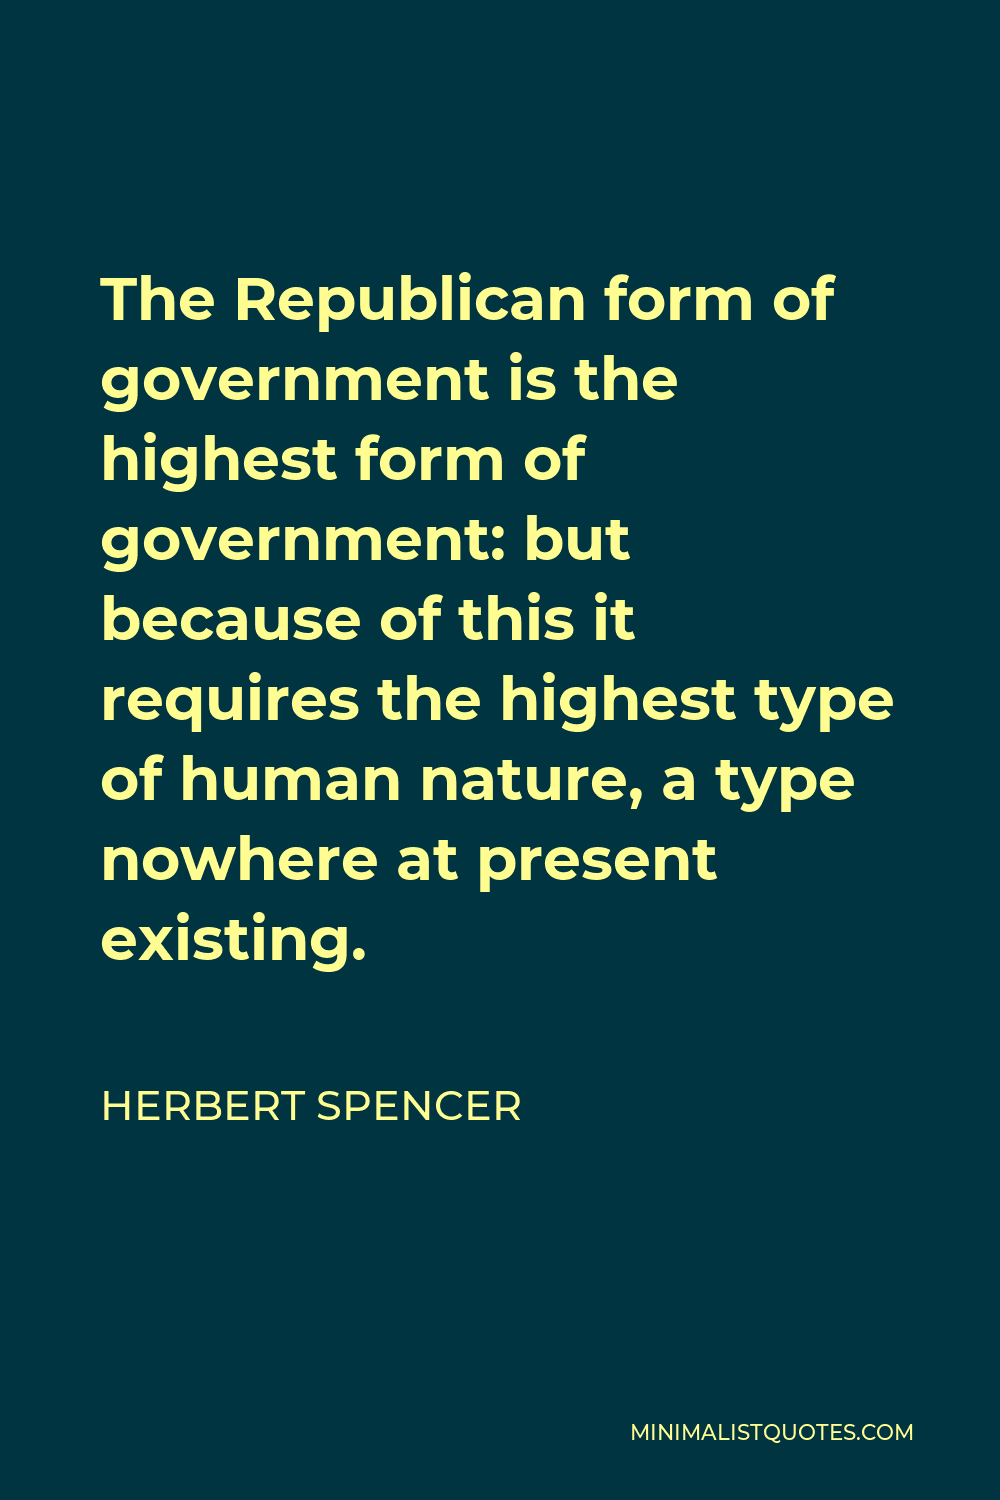 Herbert Spencer Quote - The Republican form of government is the highest form of government: but because of this it requires the highest type of human nature, a type nowhere at present existing.